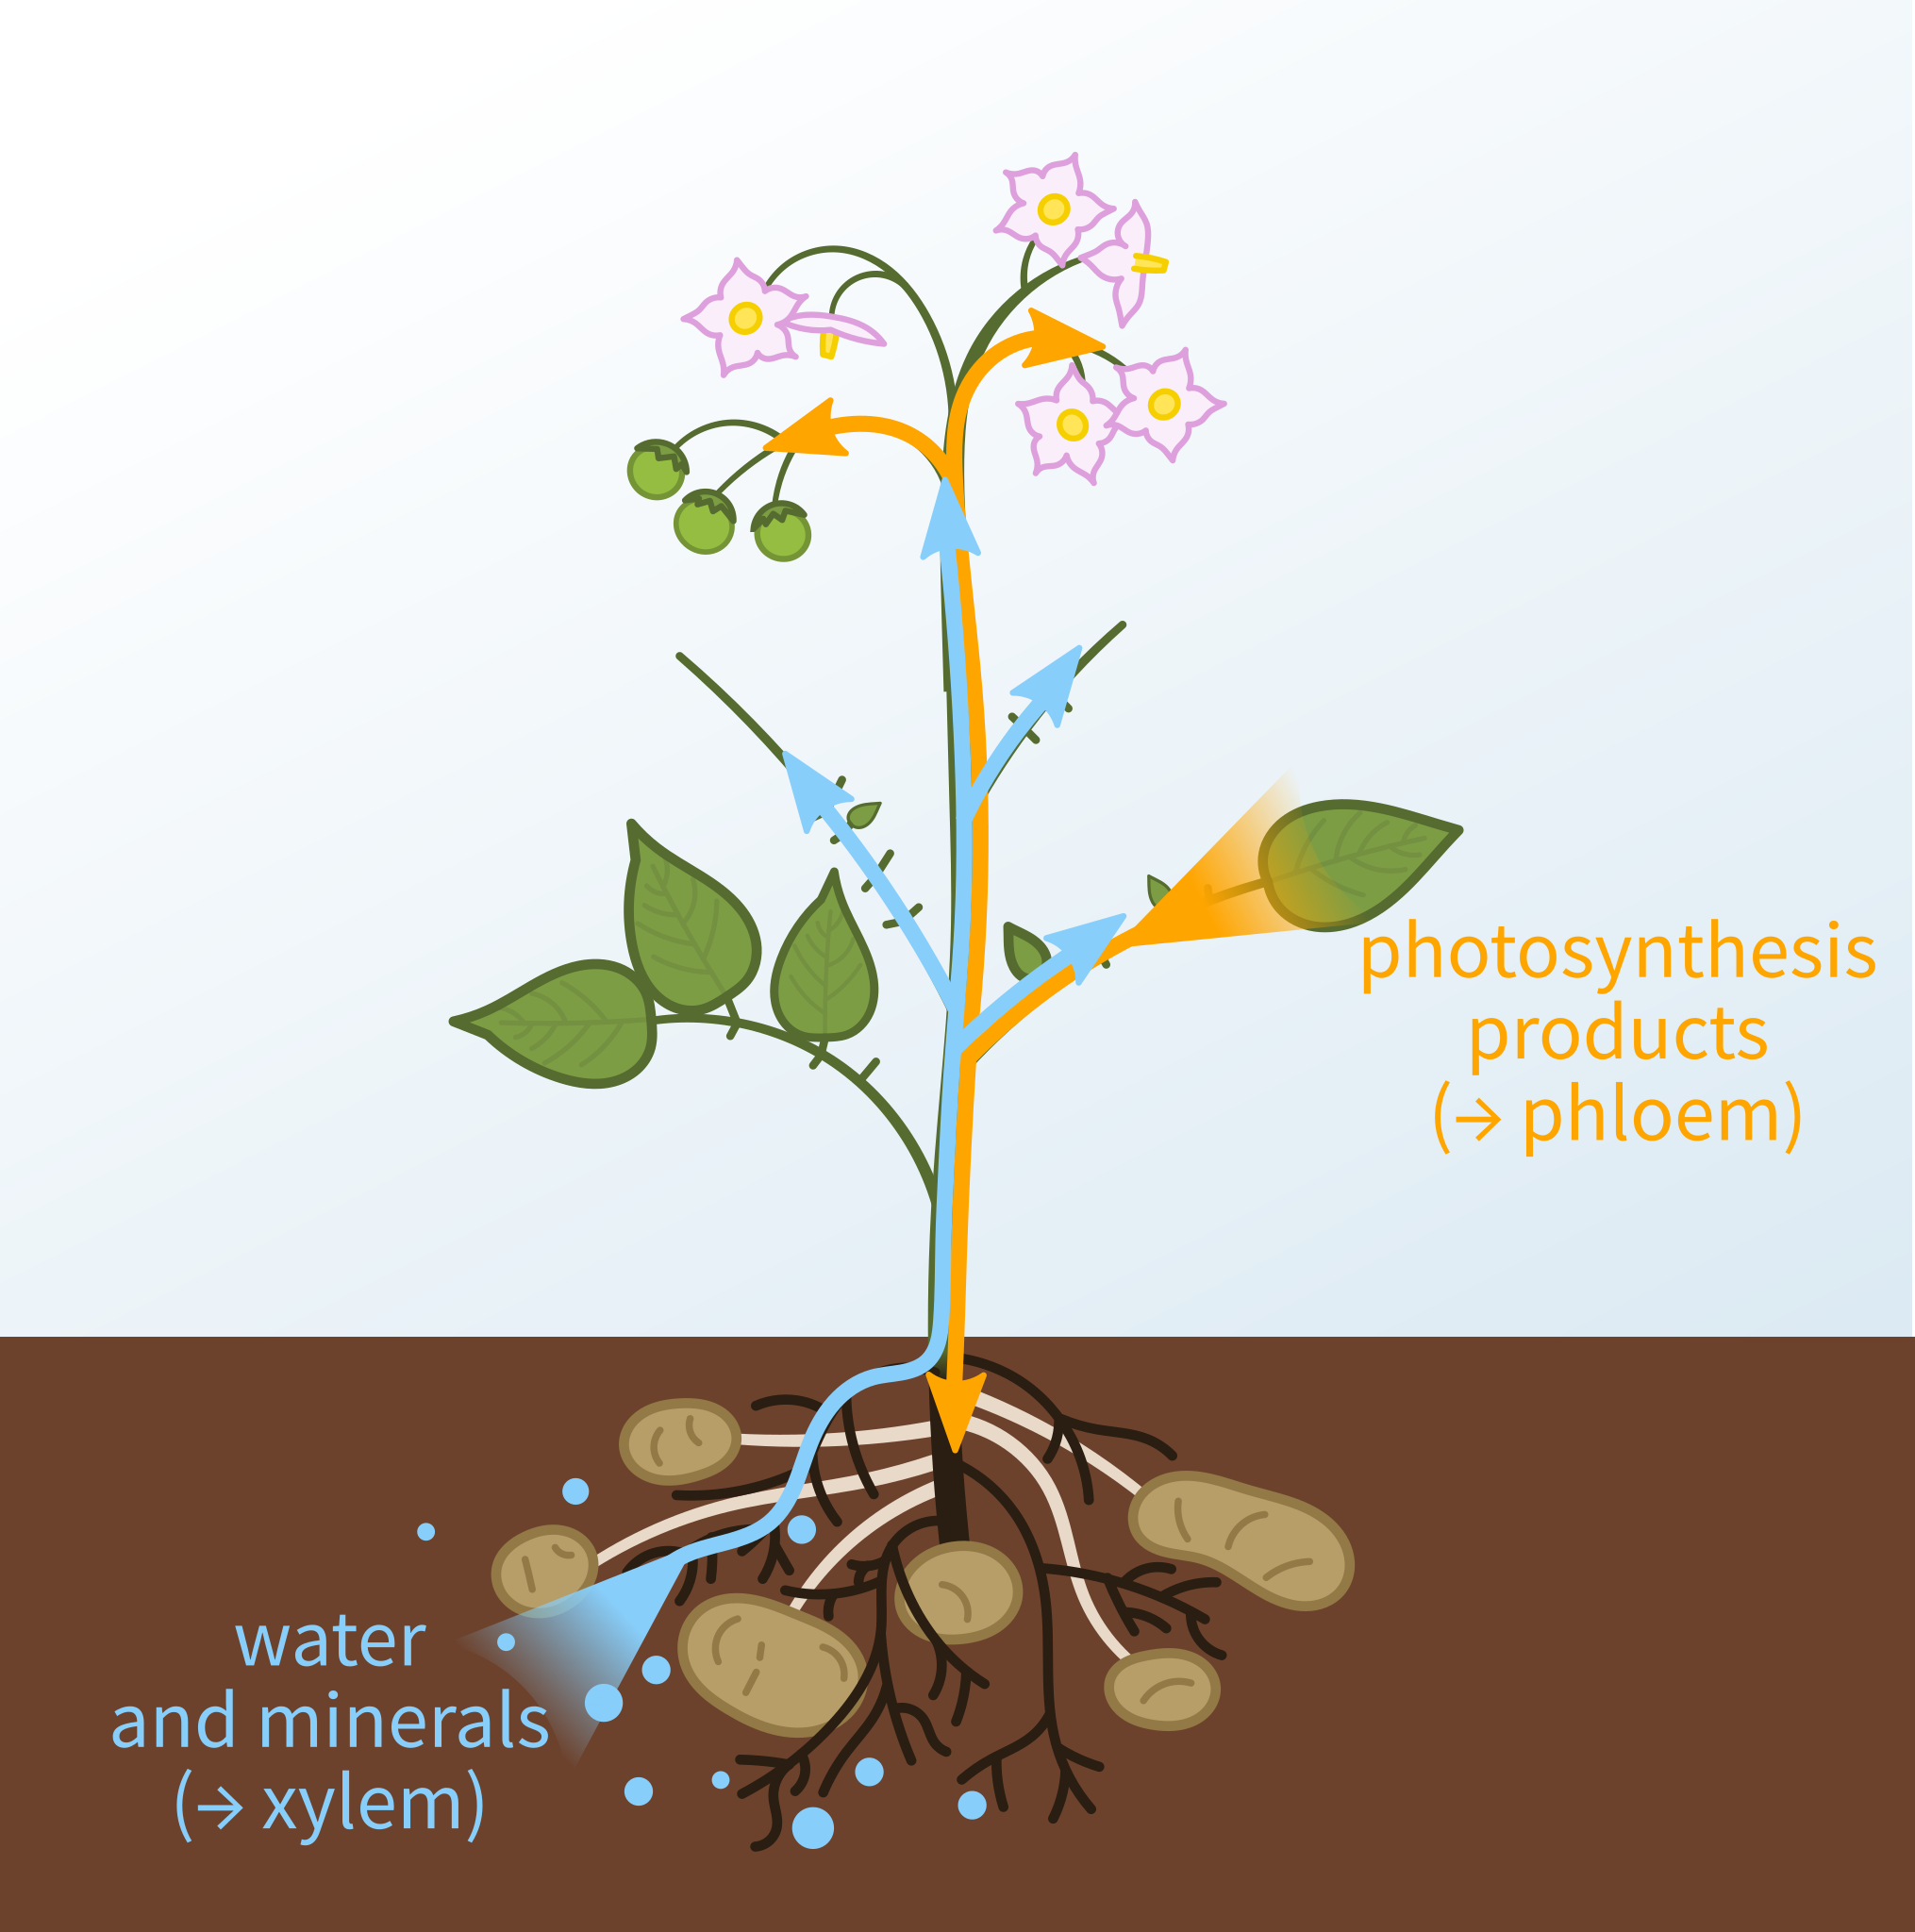 Diagram of a plant. The roots are shown underground, then there is a main stem with several shoots coming off it with leaves on them. At the top of the stem are some flowers. A blue line with arrows on it shows the xylem carrying water and mineral from the roots up to the rest of the plant. There is also a yellow line to showing the phloem carrying the products of photosynthesis from the leaves to the rest of the plant.